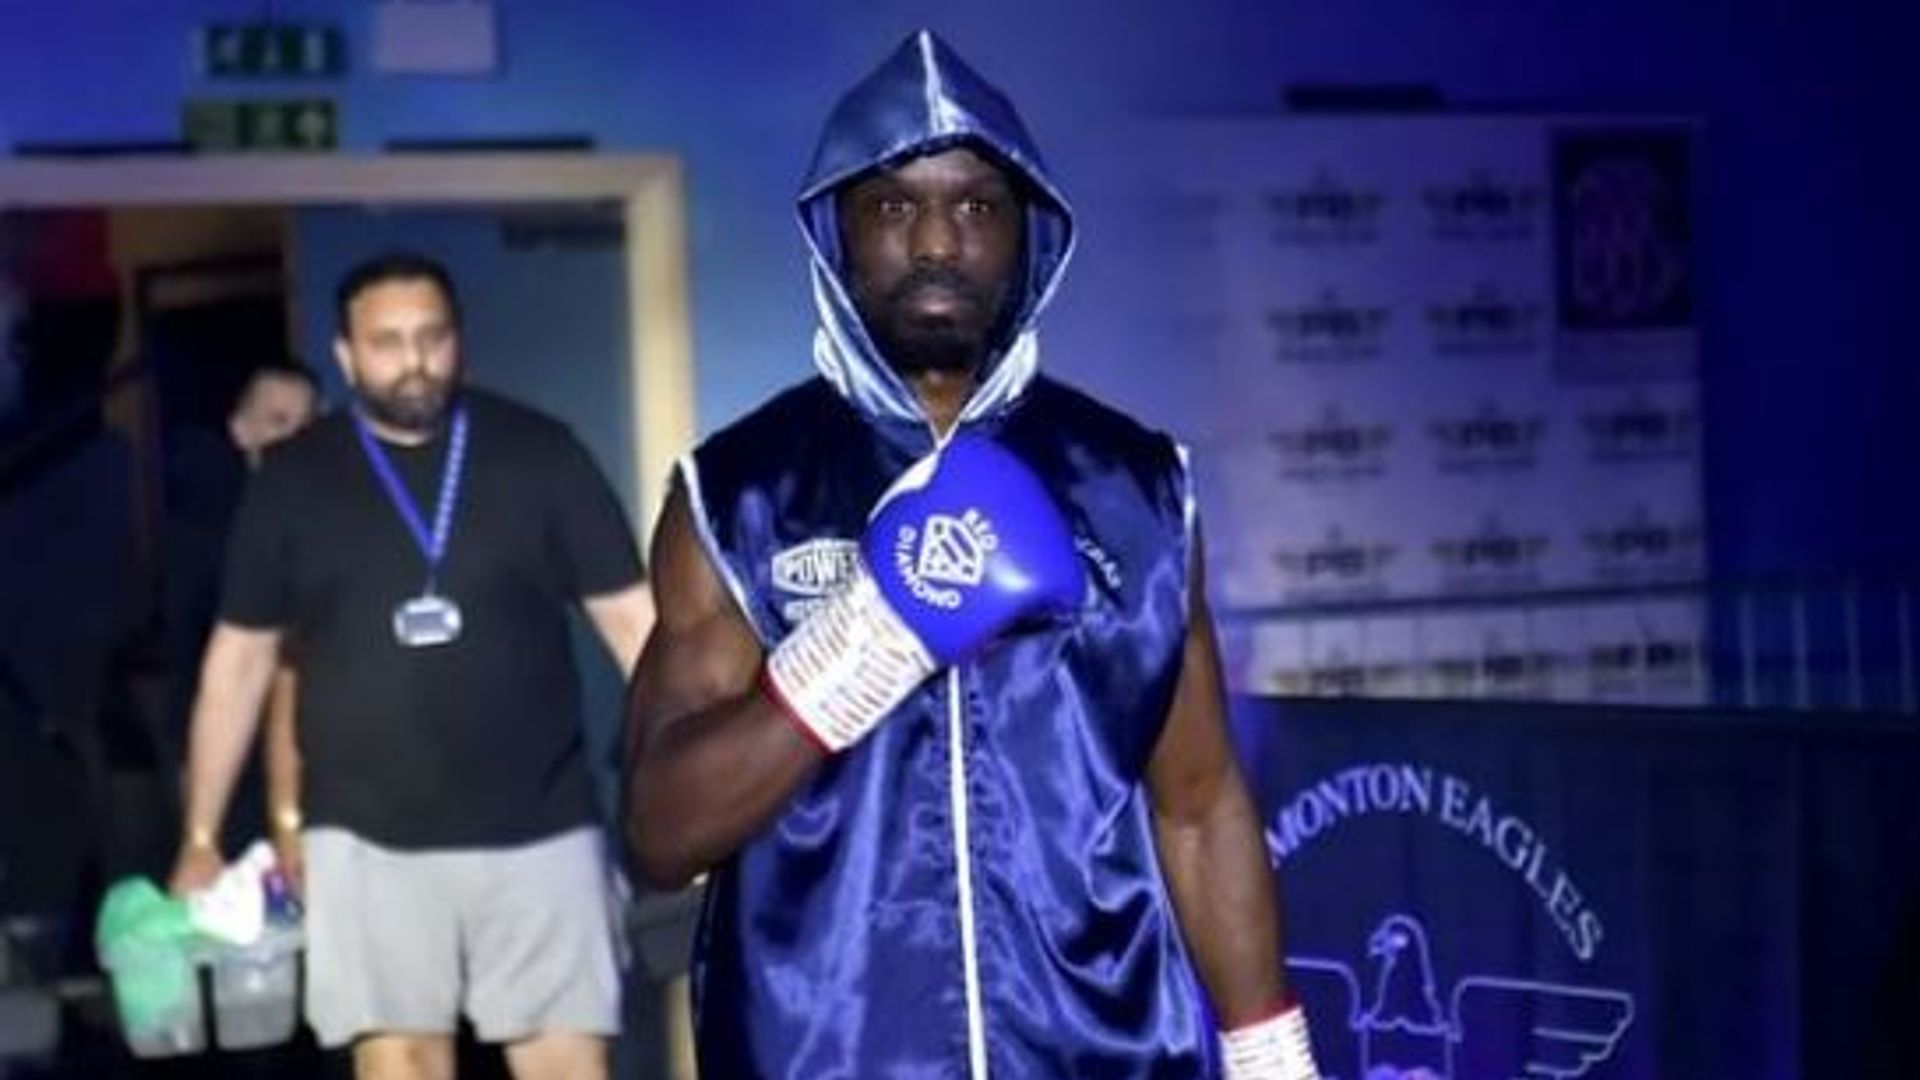 UK-based boxer dies after being knocked down during professional debut...